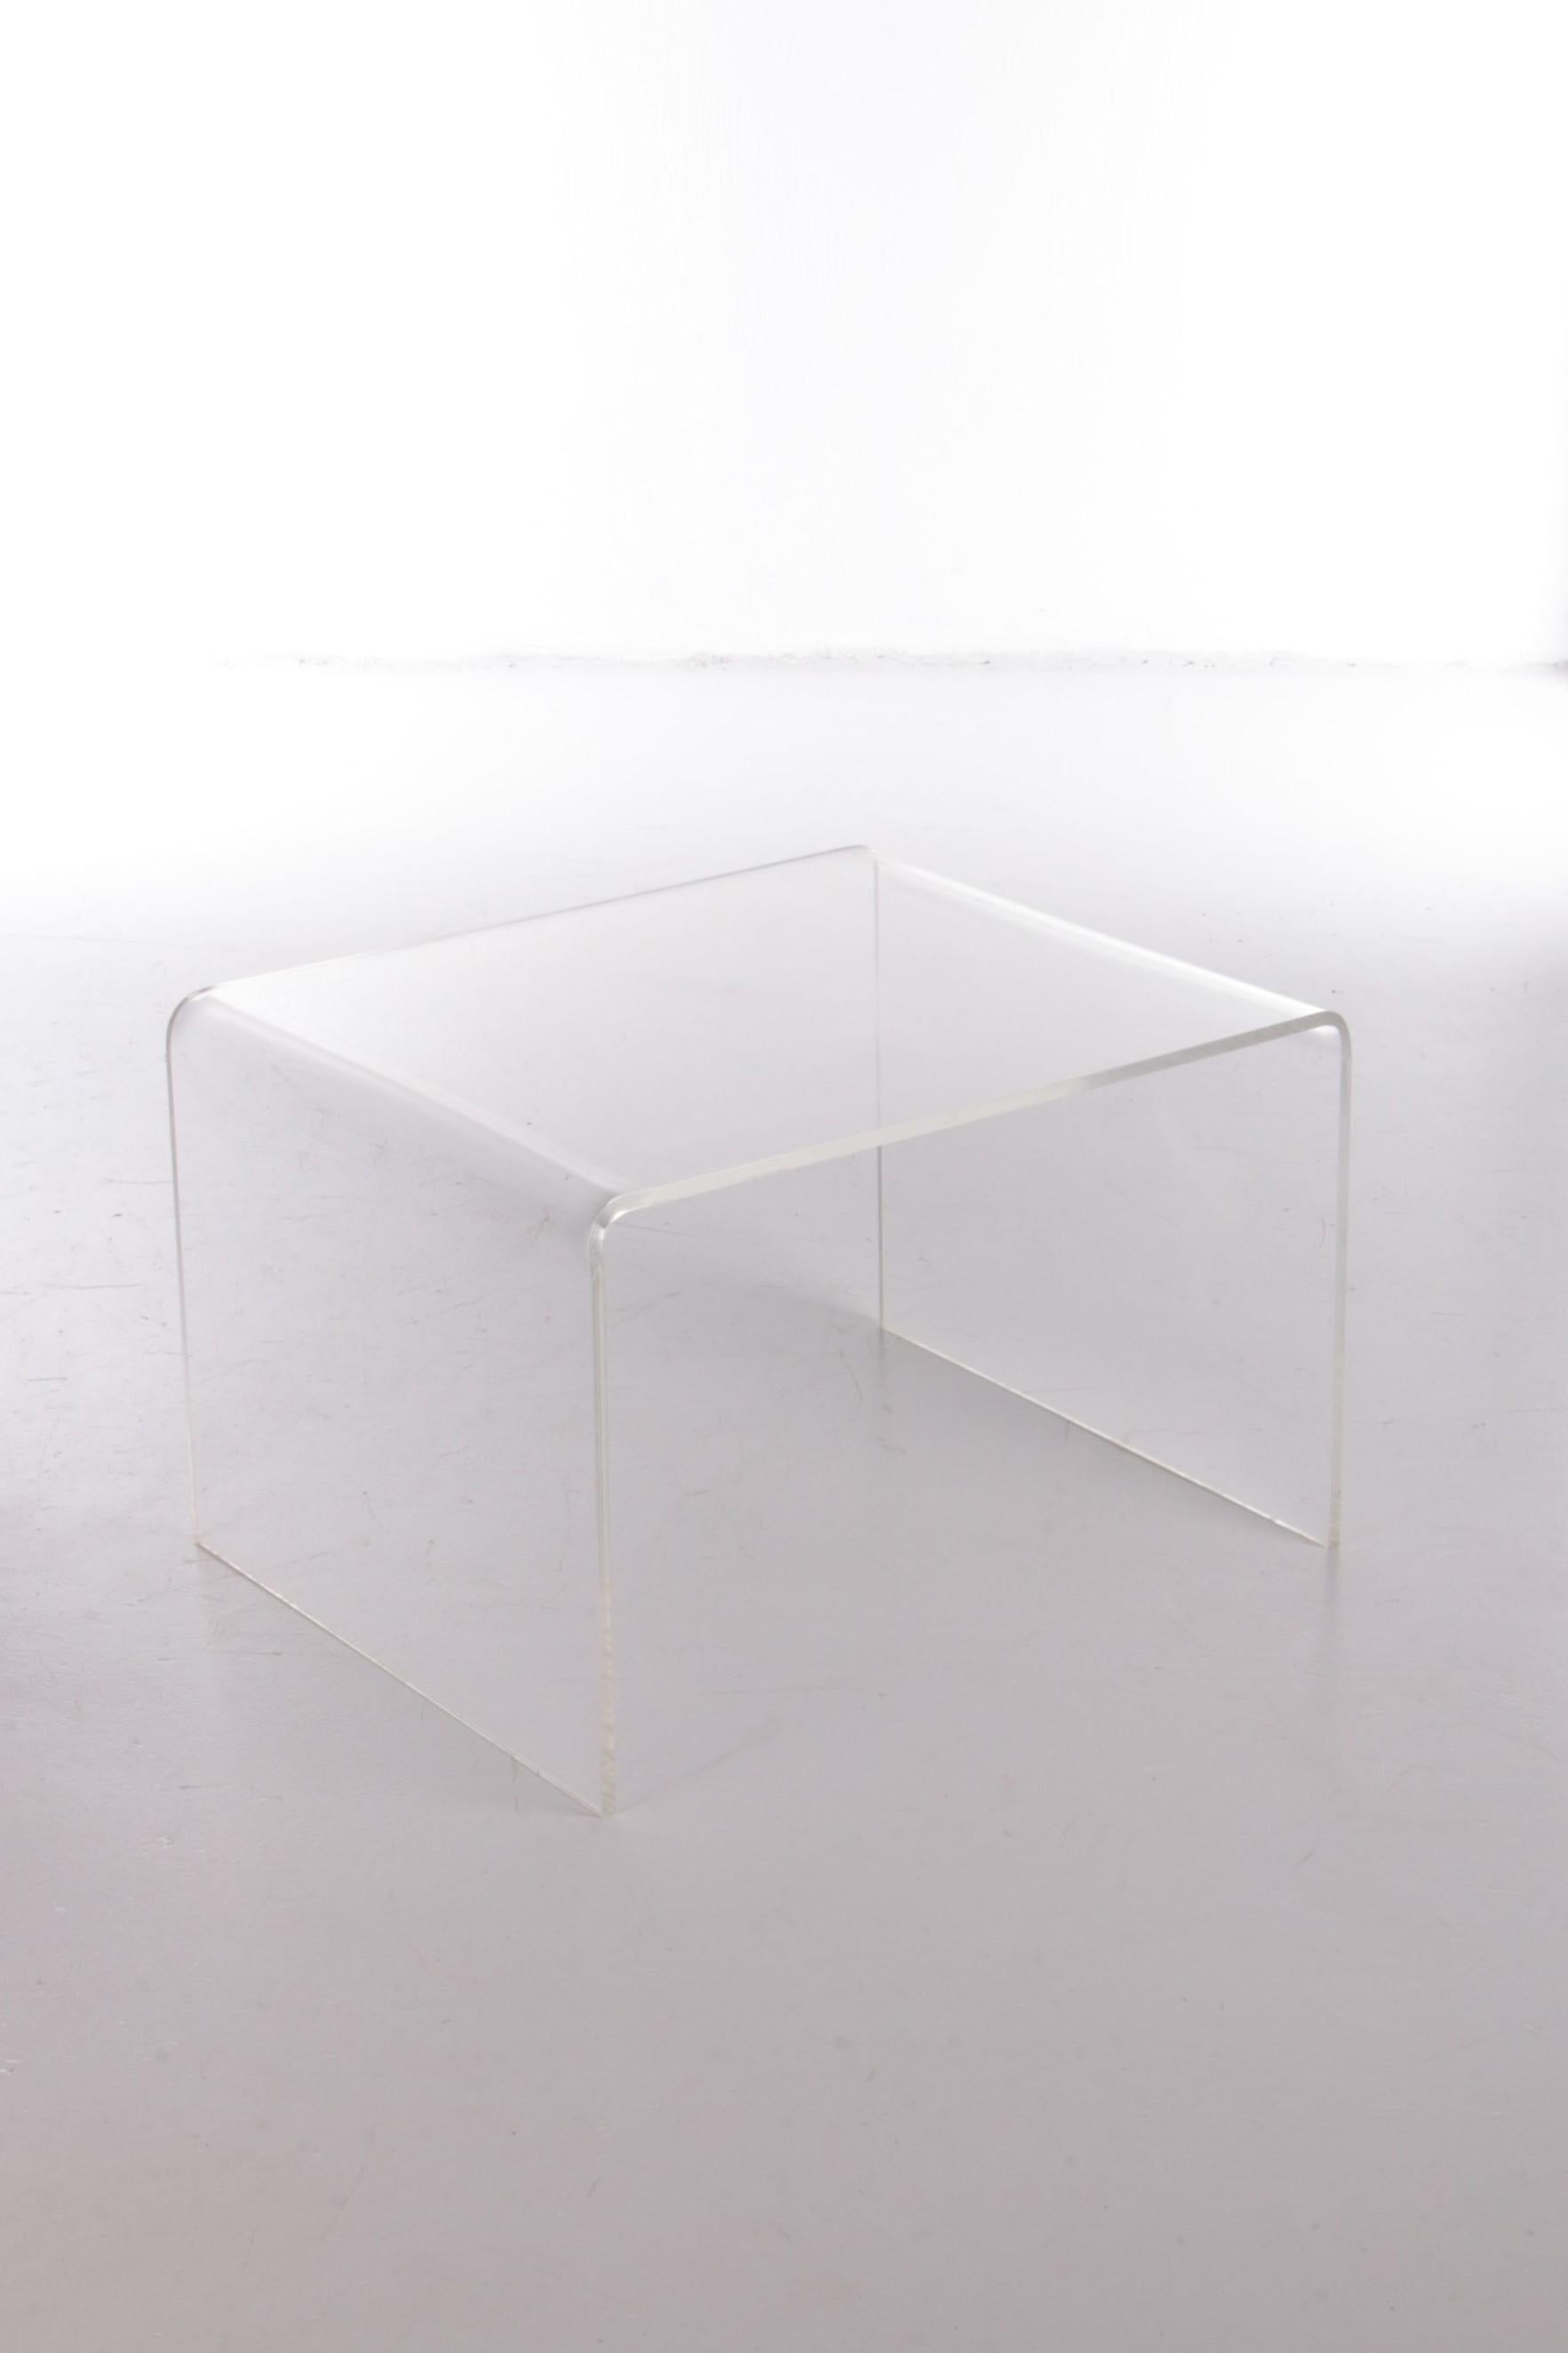 Plexiglass side table or plant table suits many living styles, 1970s.

This is a beautiful vintage side table, made of plexiglass in the 1970s.

A beautiful simple plexiglass side table, nice to use as a side table next to the sofa.

The vintage